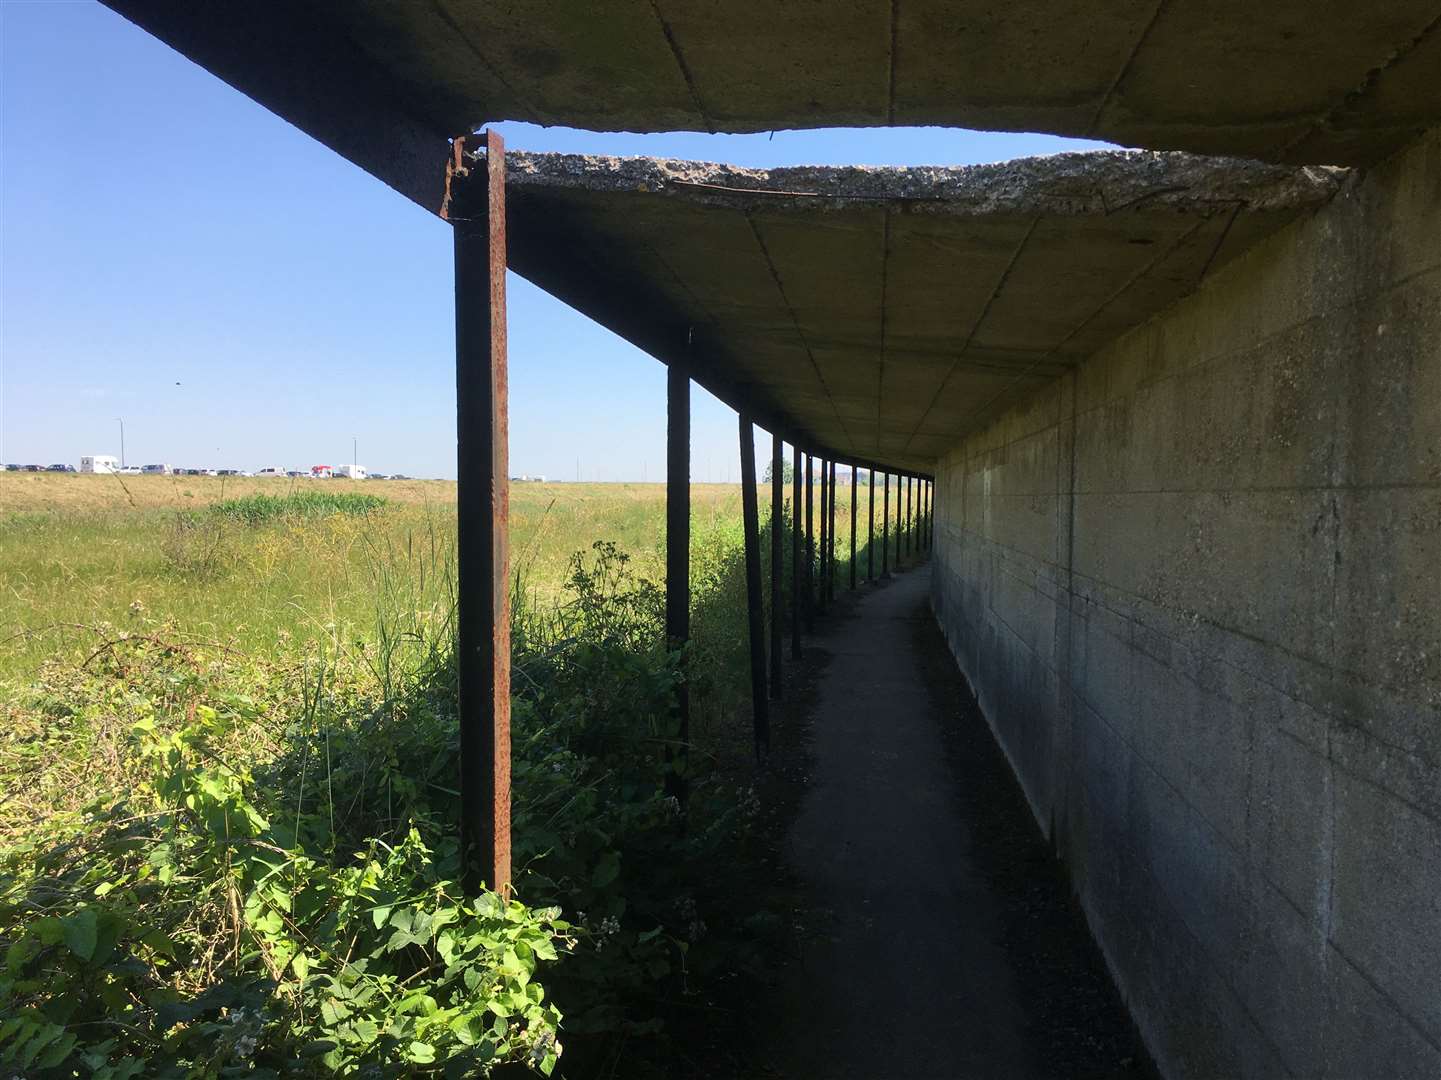 The state of the covered way at Sheerness on Sheppey last summer with graffiti and dangerous gaps in its concrete roof